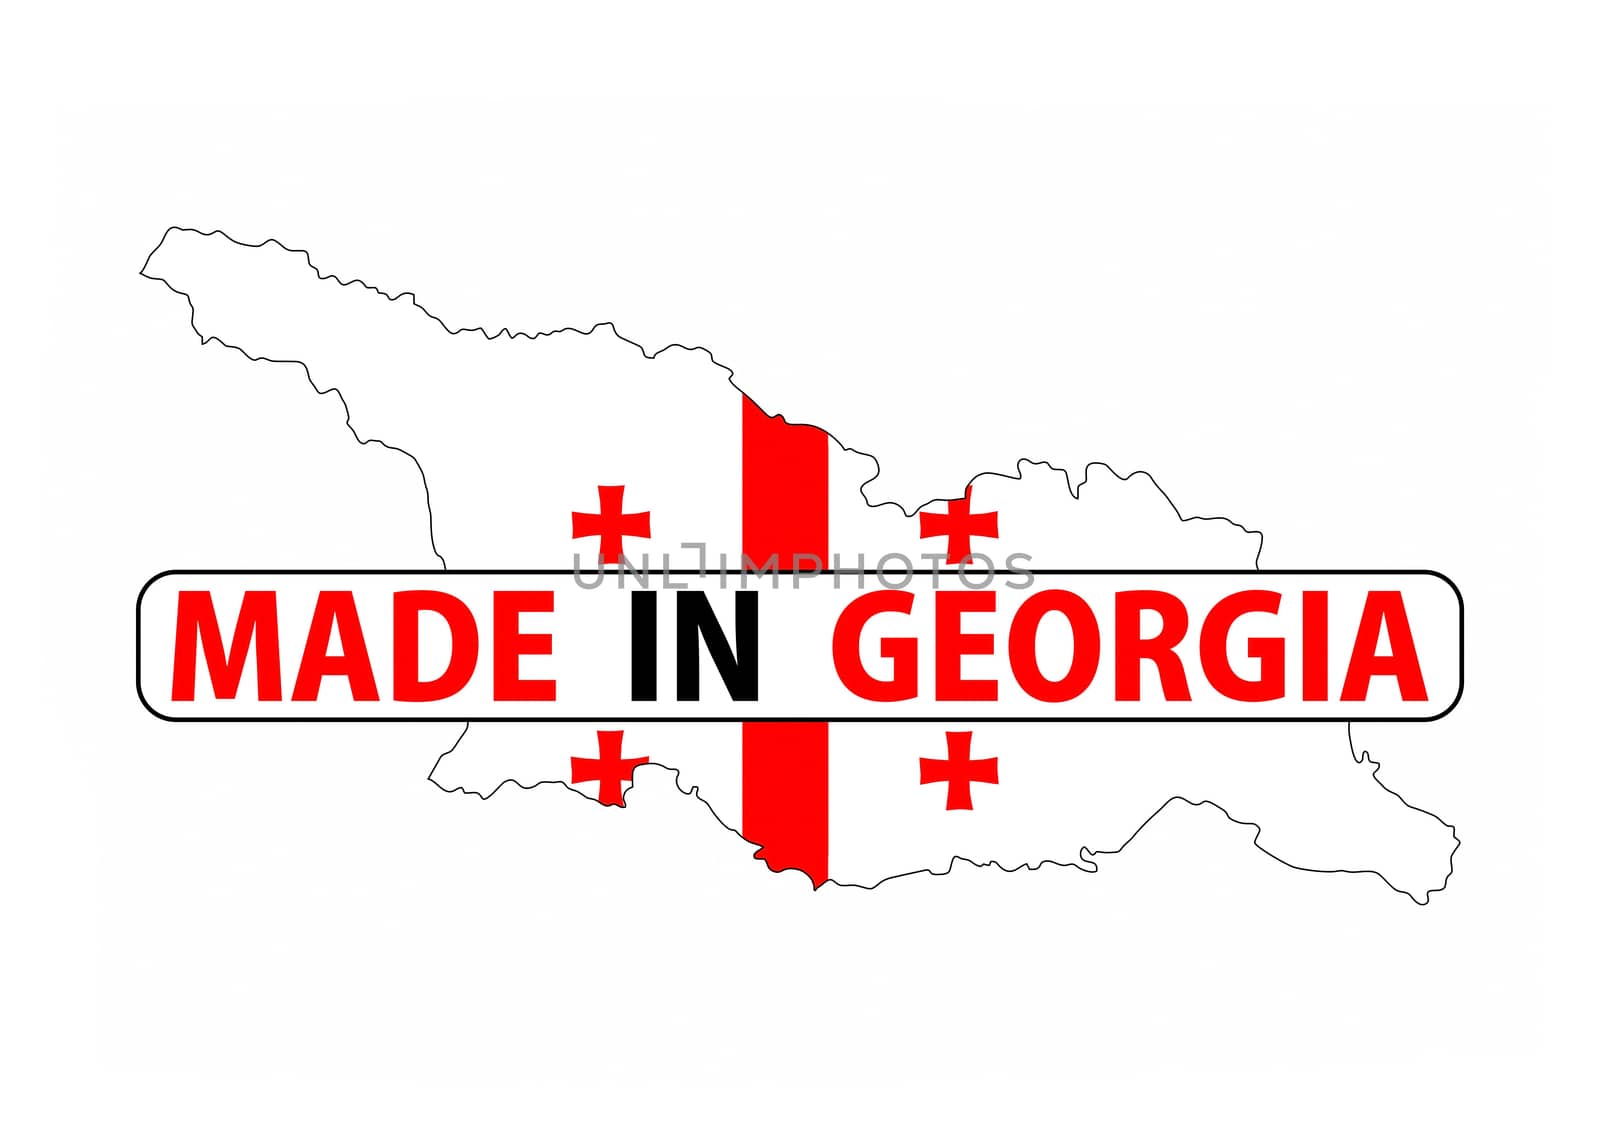 made in georgia country national flag map shape with text